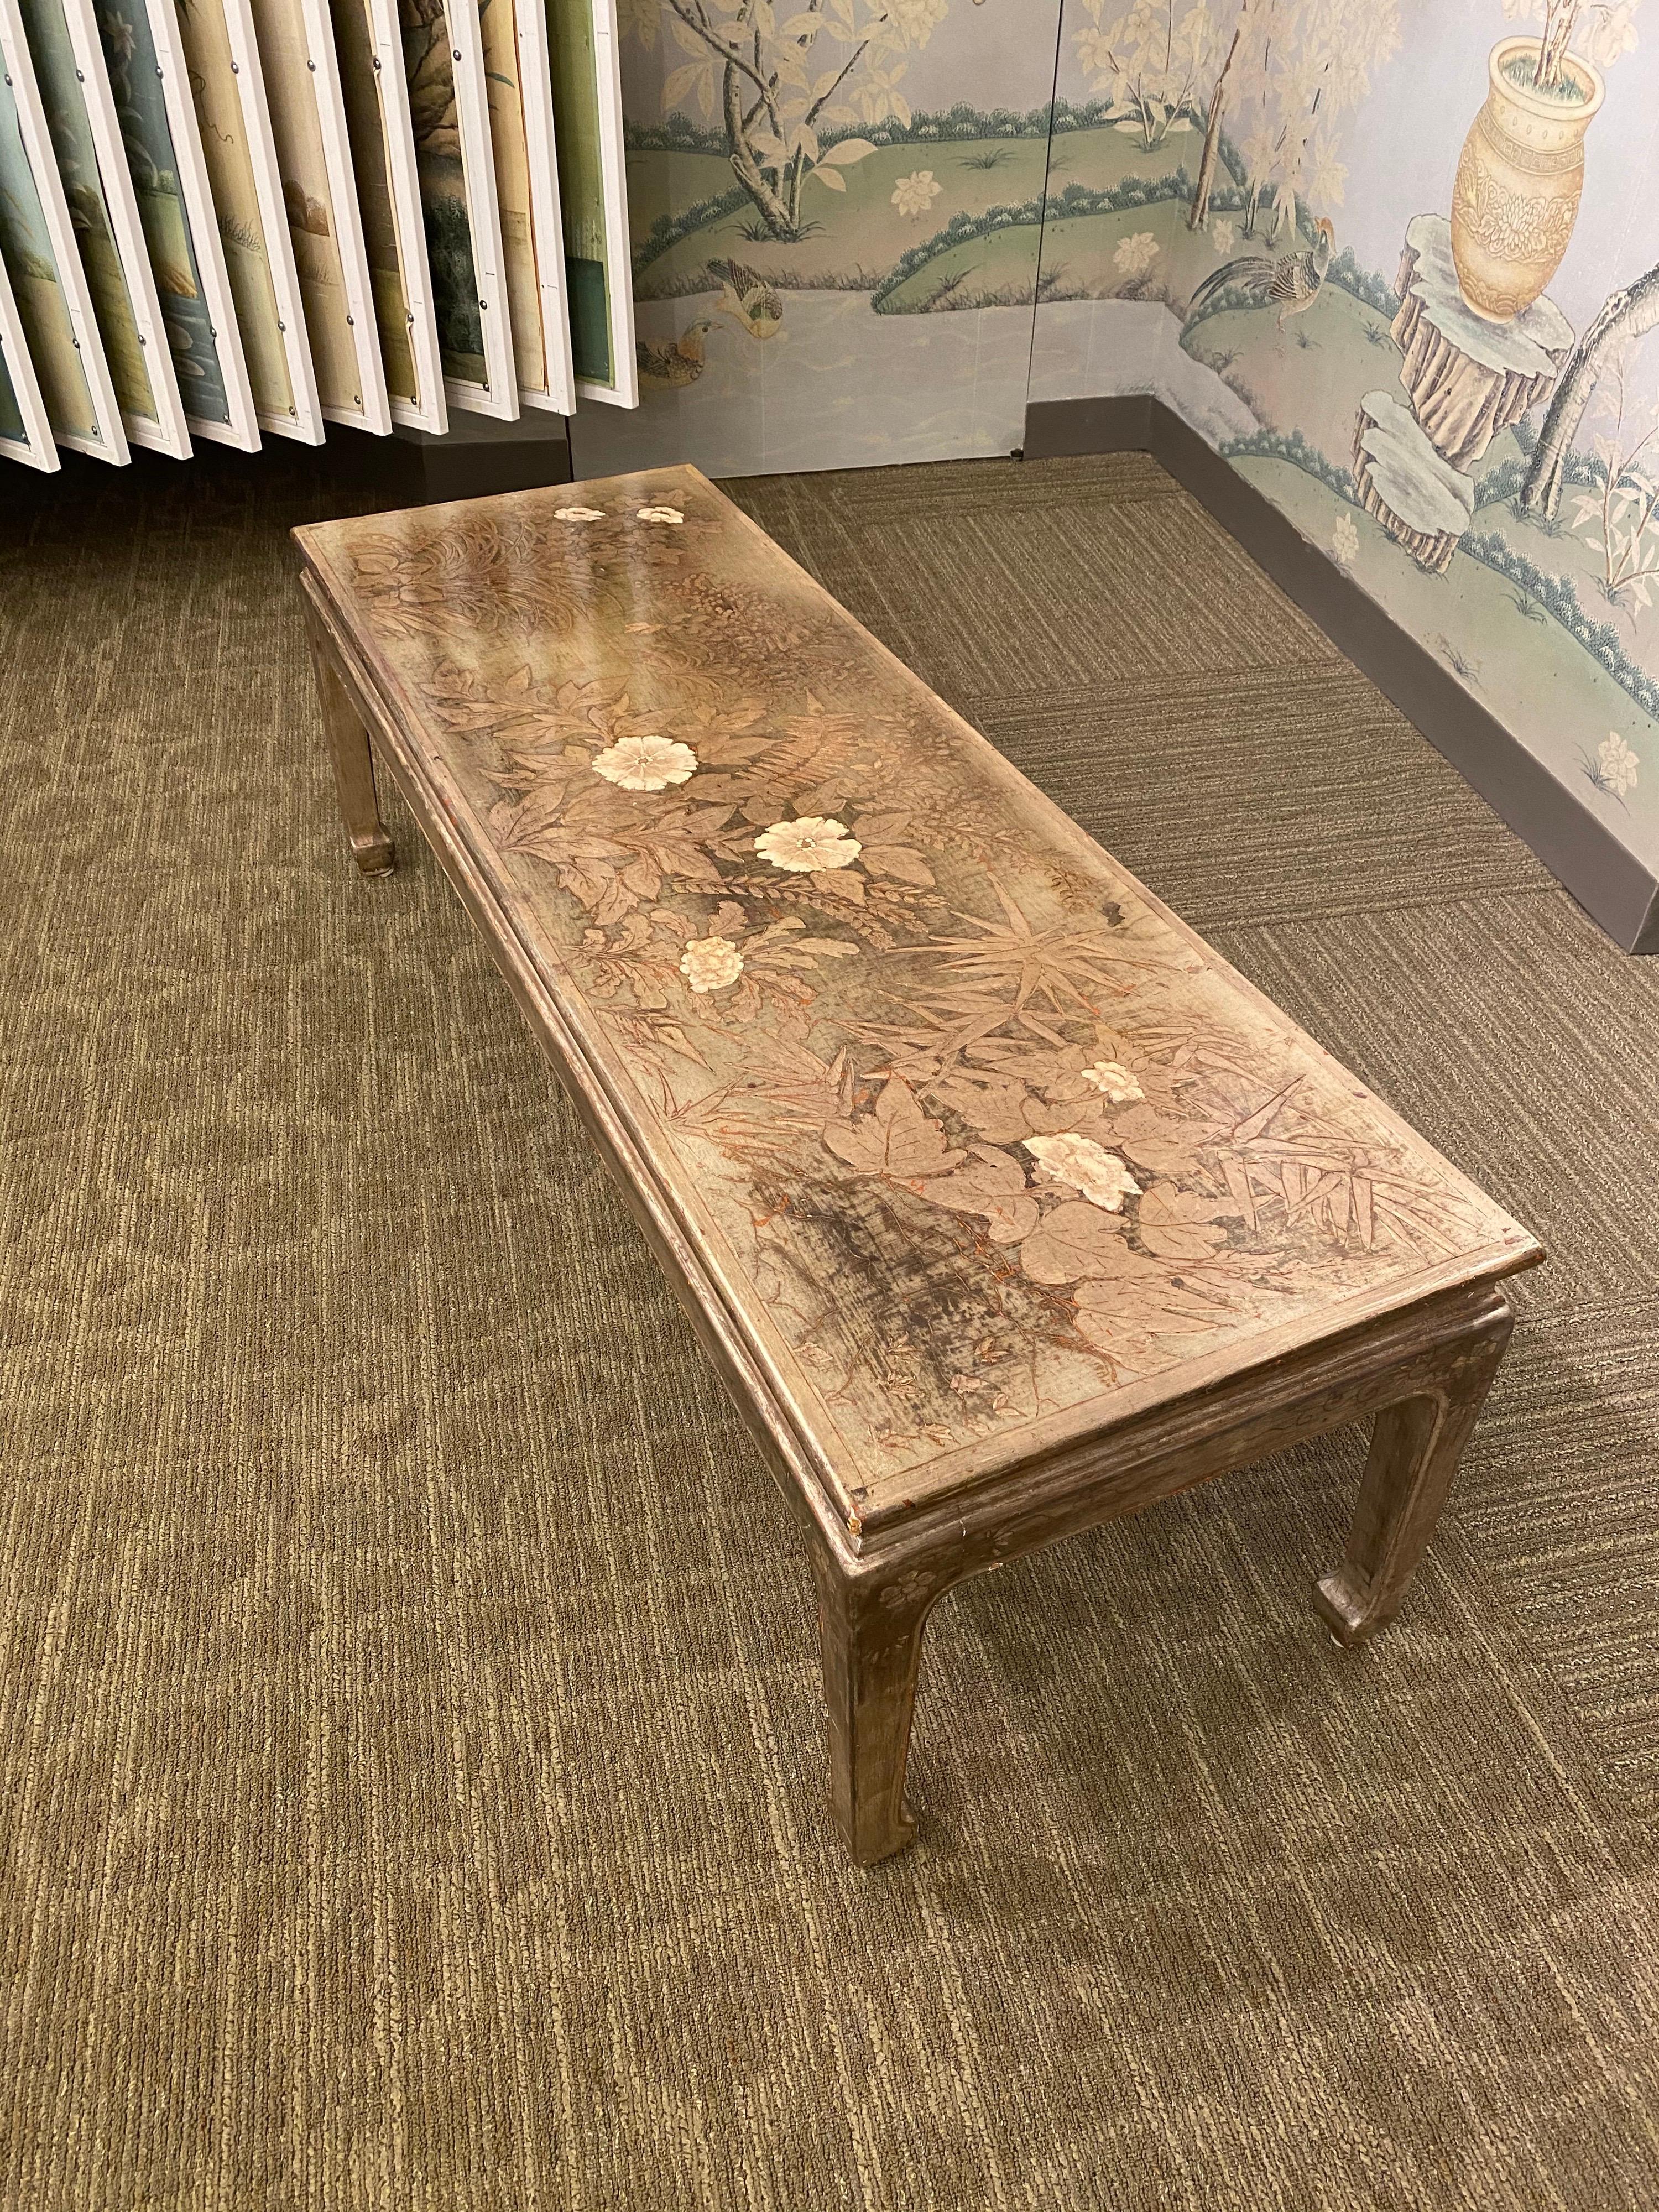 A beautiful vintage Max Kuehne coffee table, finished in silver leaf and with incised design of flowers, grasses and ferns.

The apron is also incised with vines and flowers.

This table was made in the early 1960s.